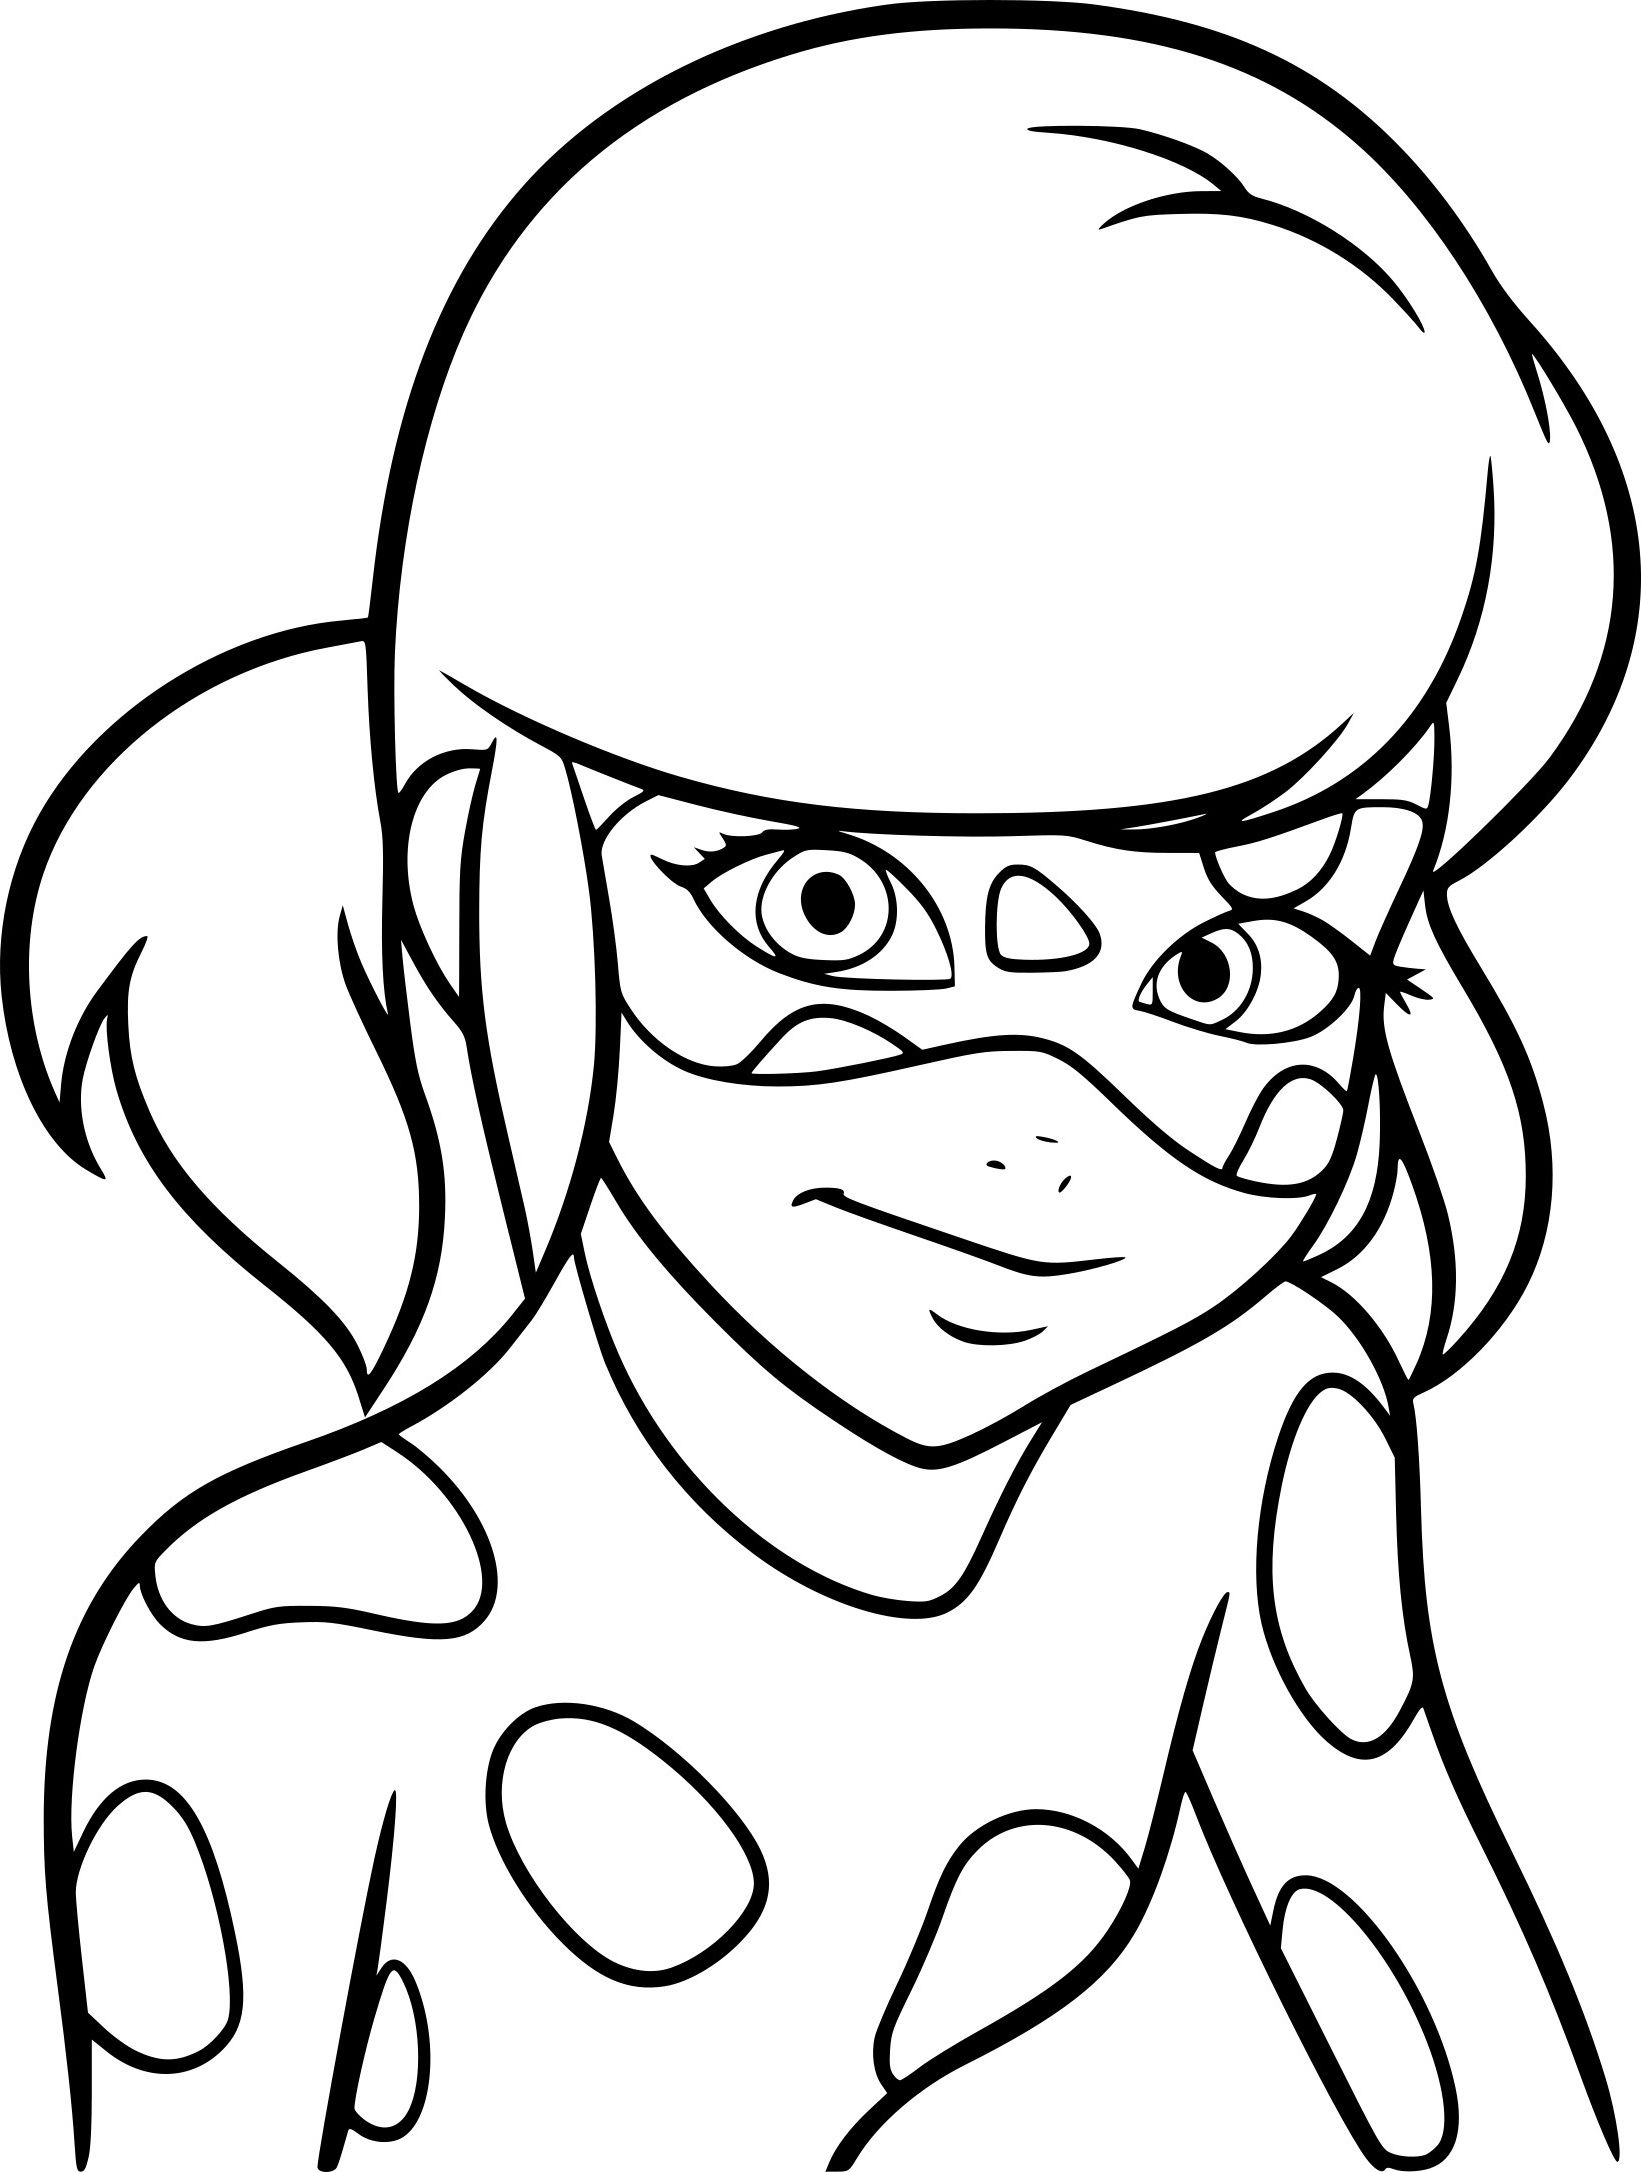 Miraculous Ladybug Coloring Pages All Characters - Tripafethna dedans Coloriage Miraculous Marinette Et Adrien